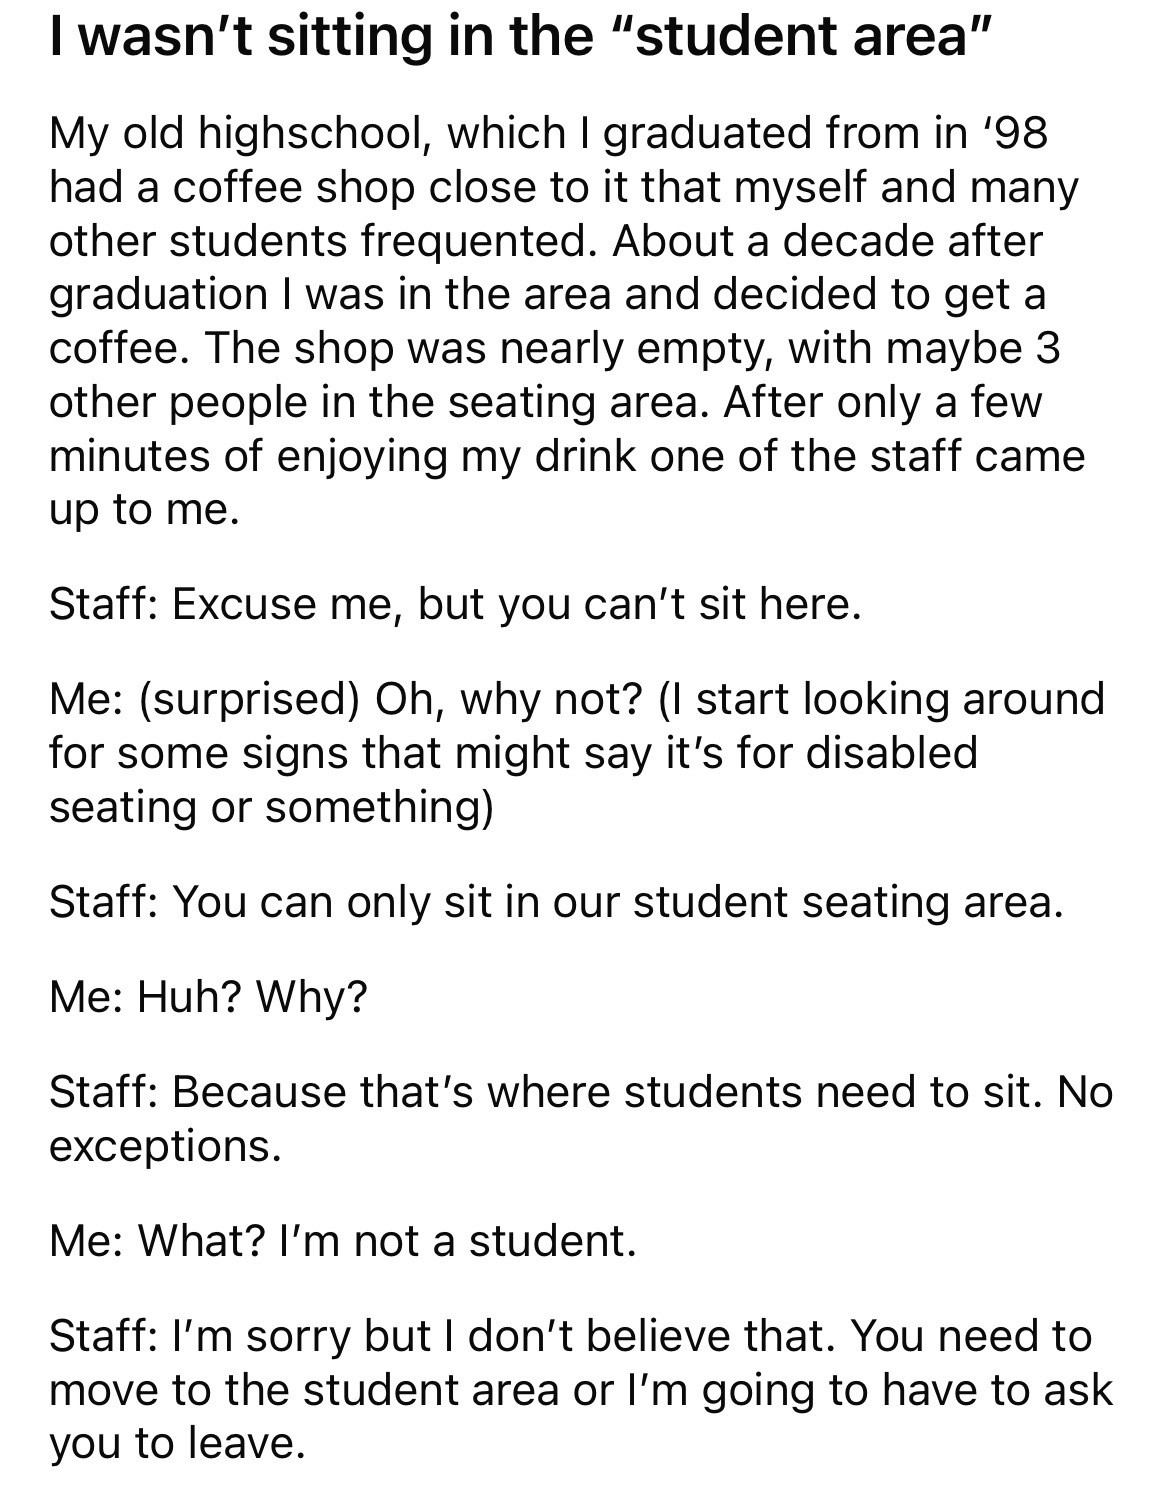 angle - I wasn't sitting in the "student area" My old highschool, which I graduated from in '98 had a coffee shop close to it that myself and many other students frequented. About a decade after graduation I was in the area and decided to get a coffee. Th